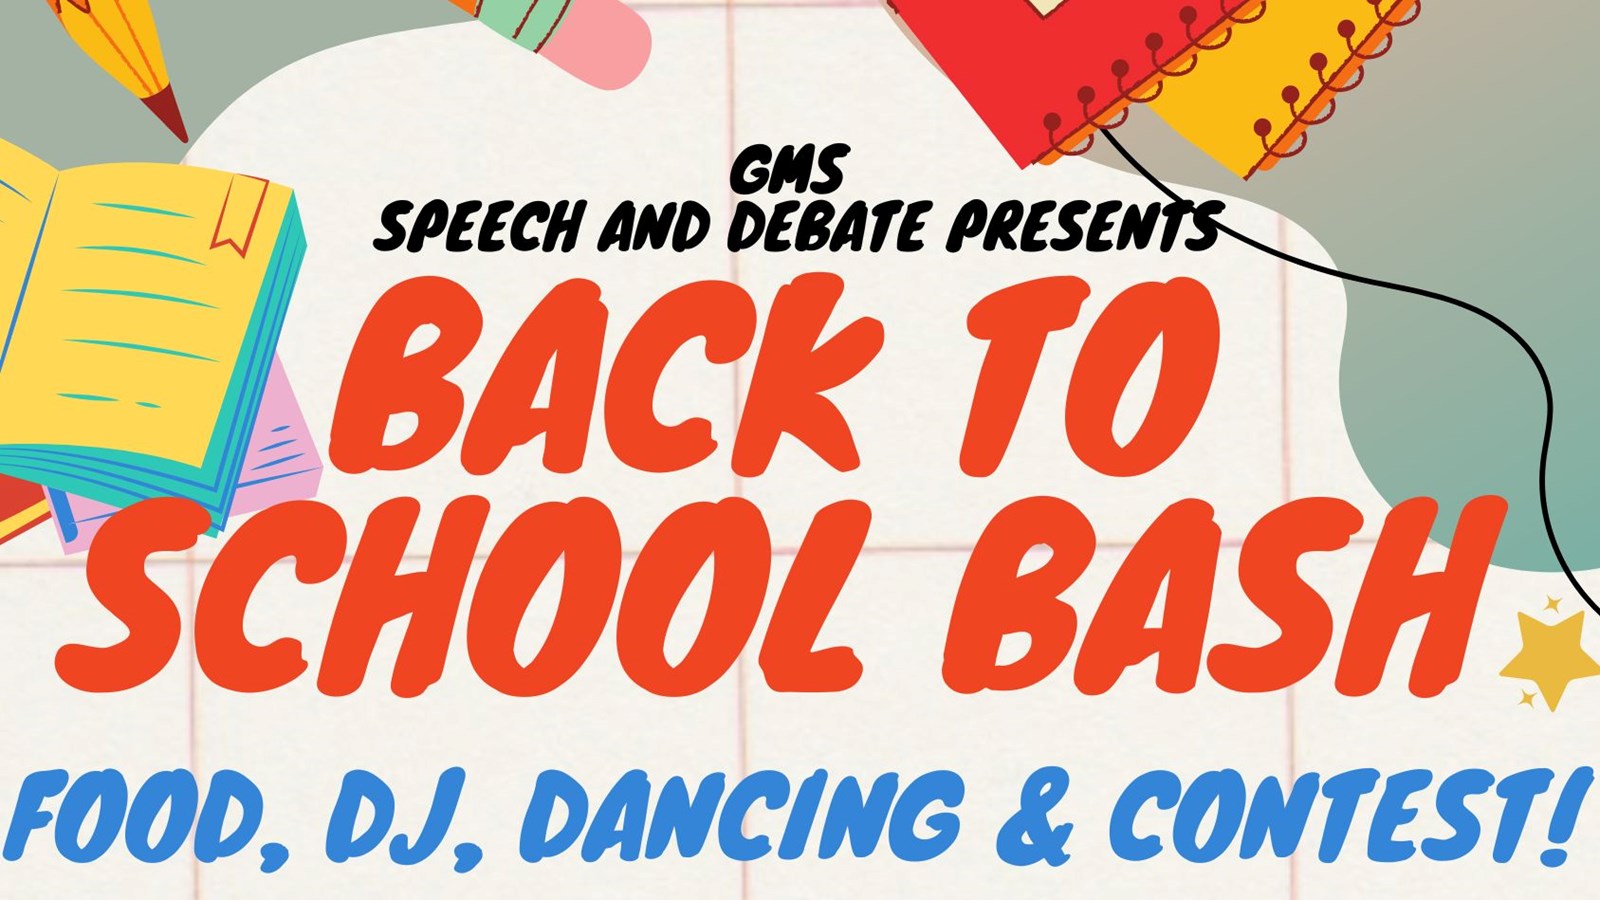 back to school bash food dj dancing and contest